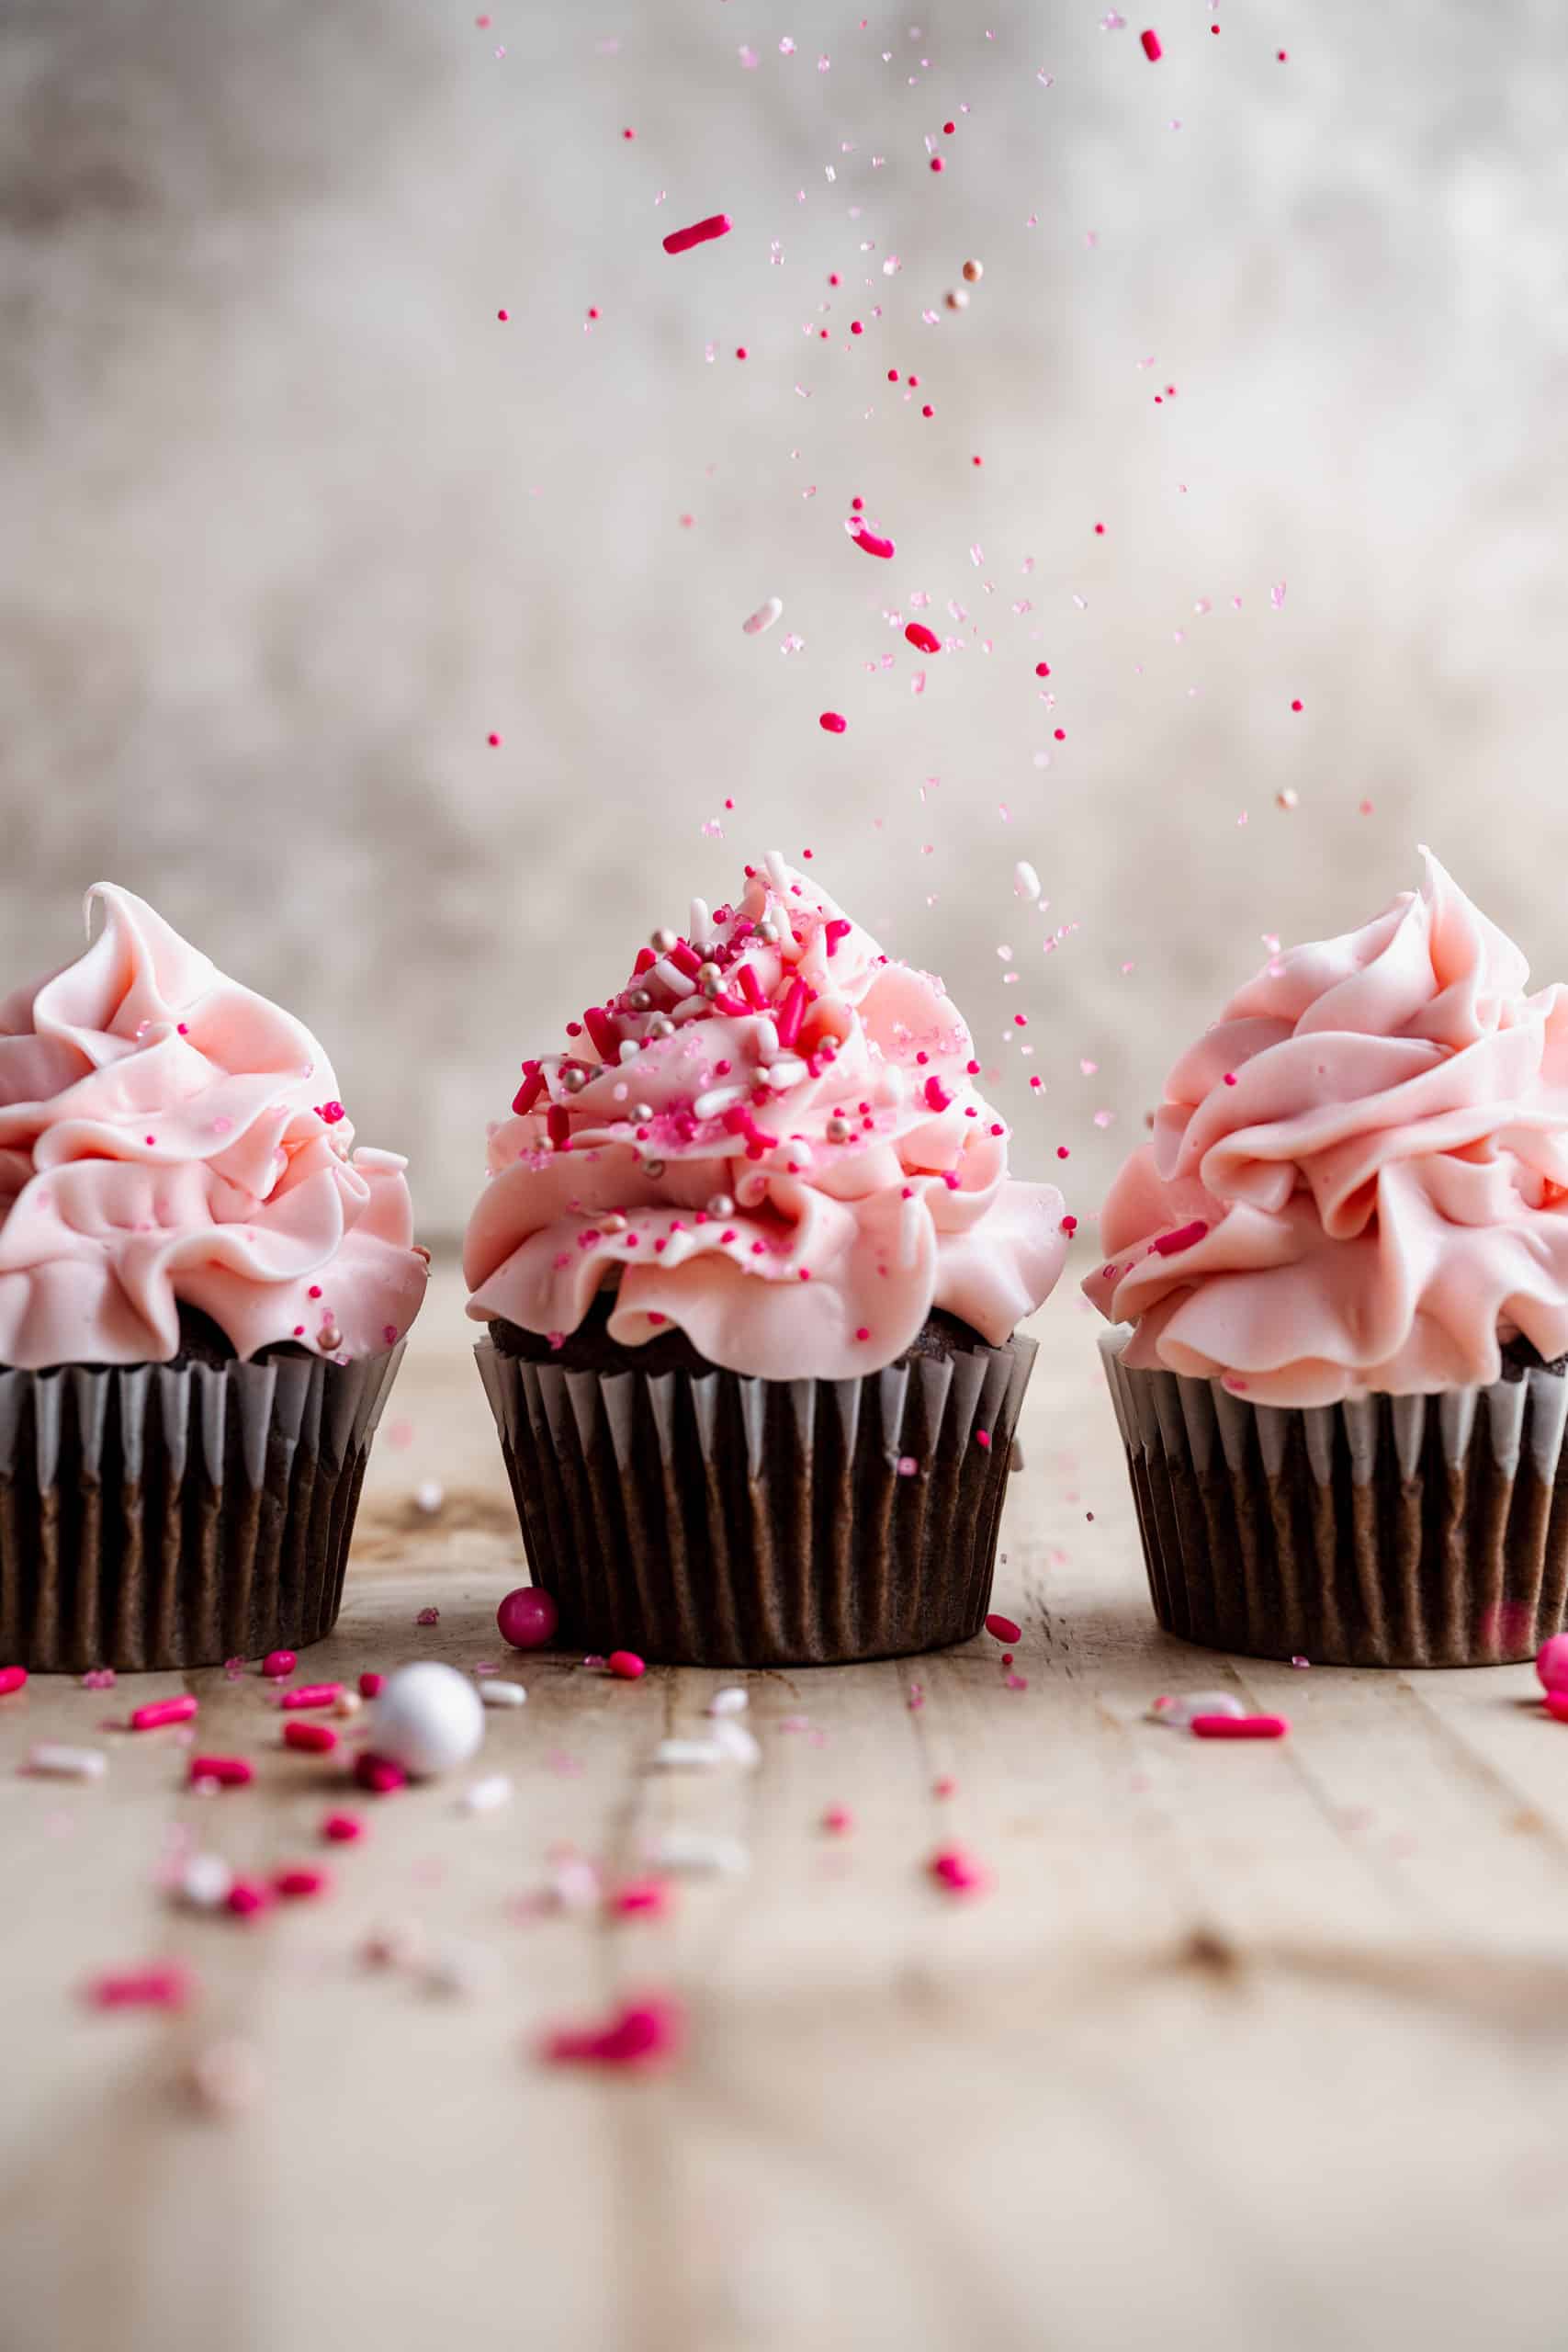 12 Valentine’s Day Desserts: The Perfect Treat for Your Loved One!